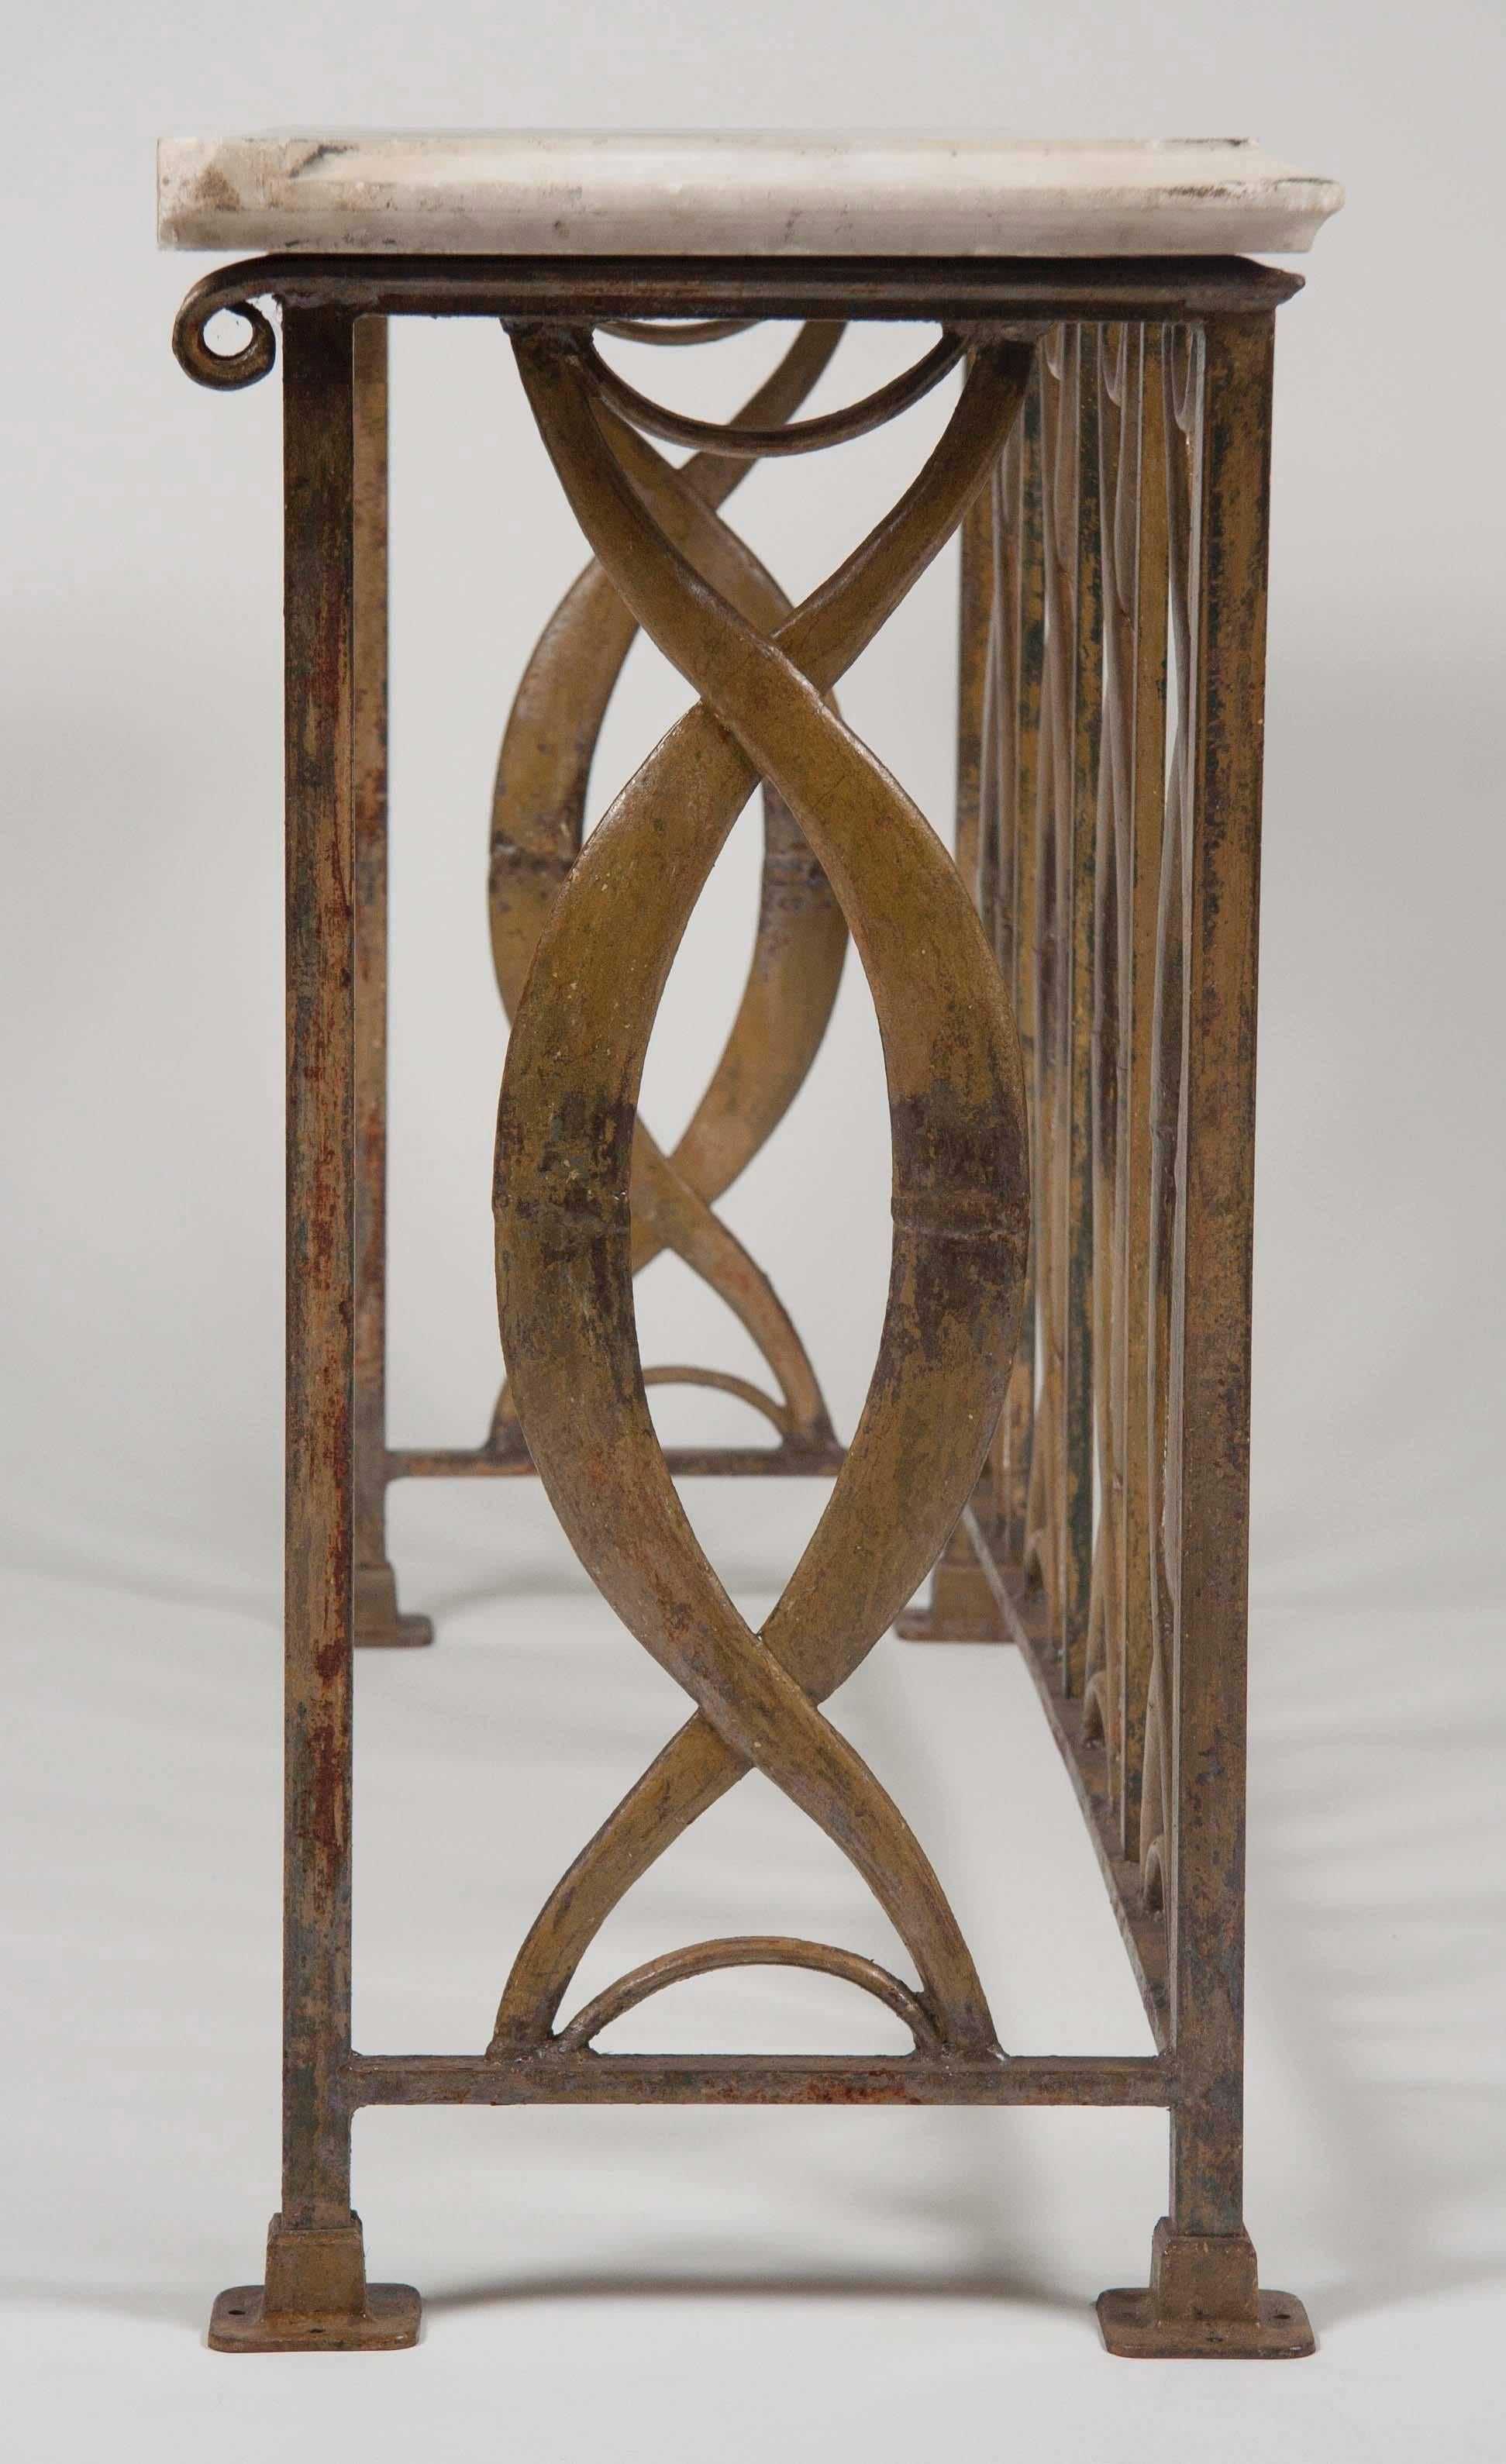 An American modern wrought iron piece signed by Chicago maker Julius Blum. Originally an architectural element, now with an associated marble top.